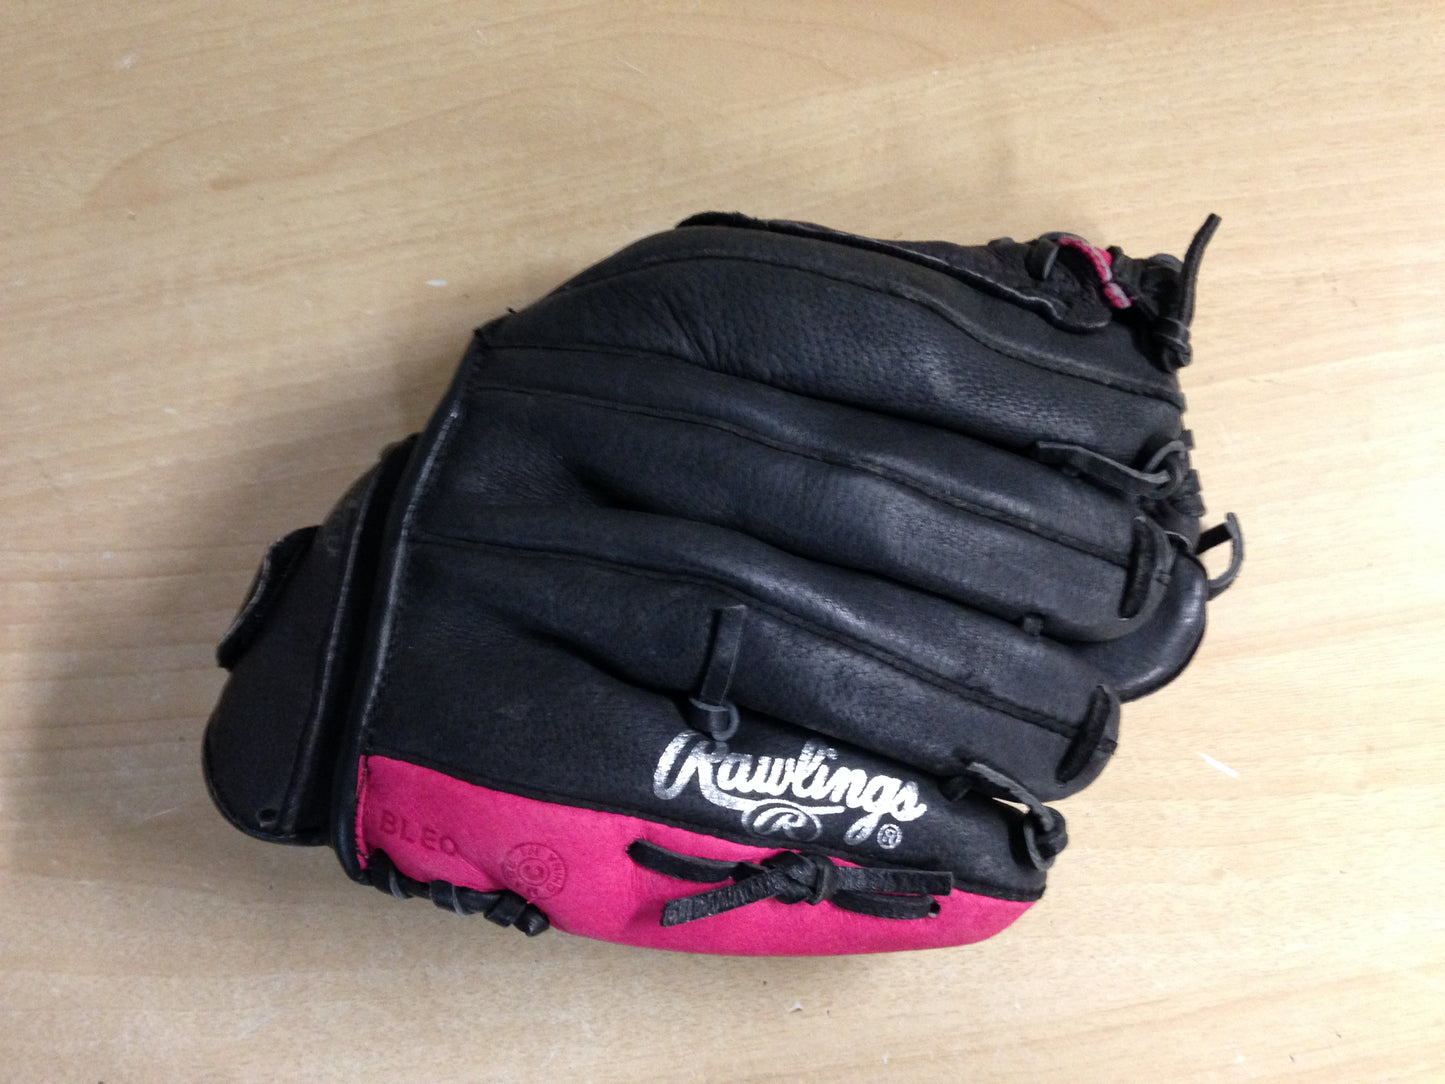 Baseball Glove Adult Size 11 inch Rawlings Black Pink Leather Fits on RIGHT Hand